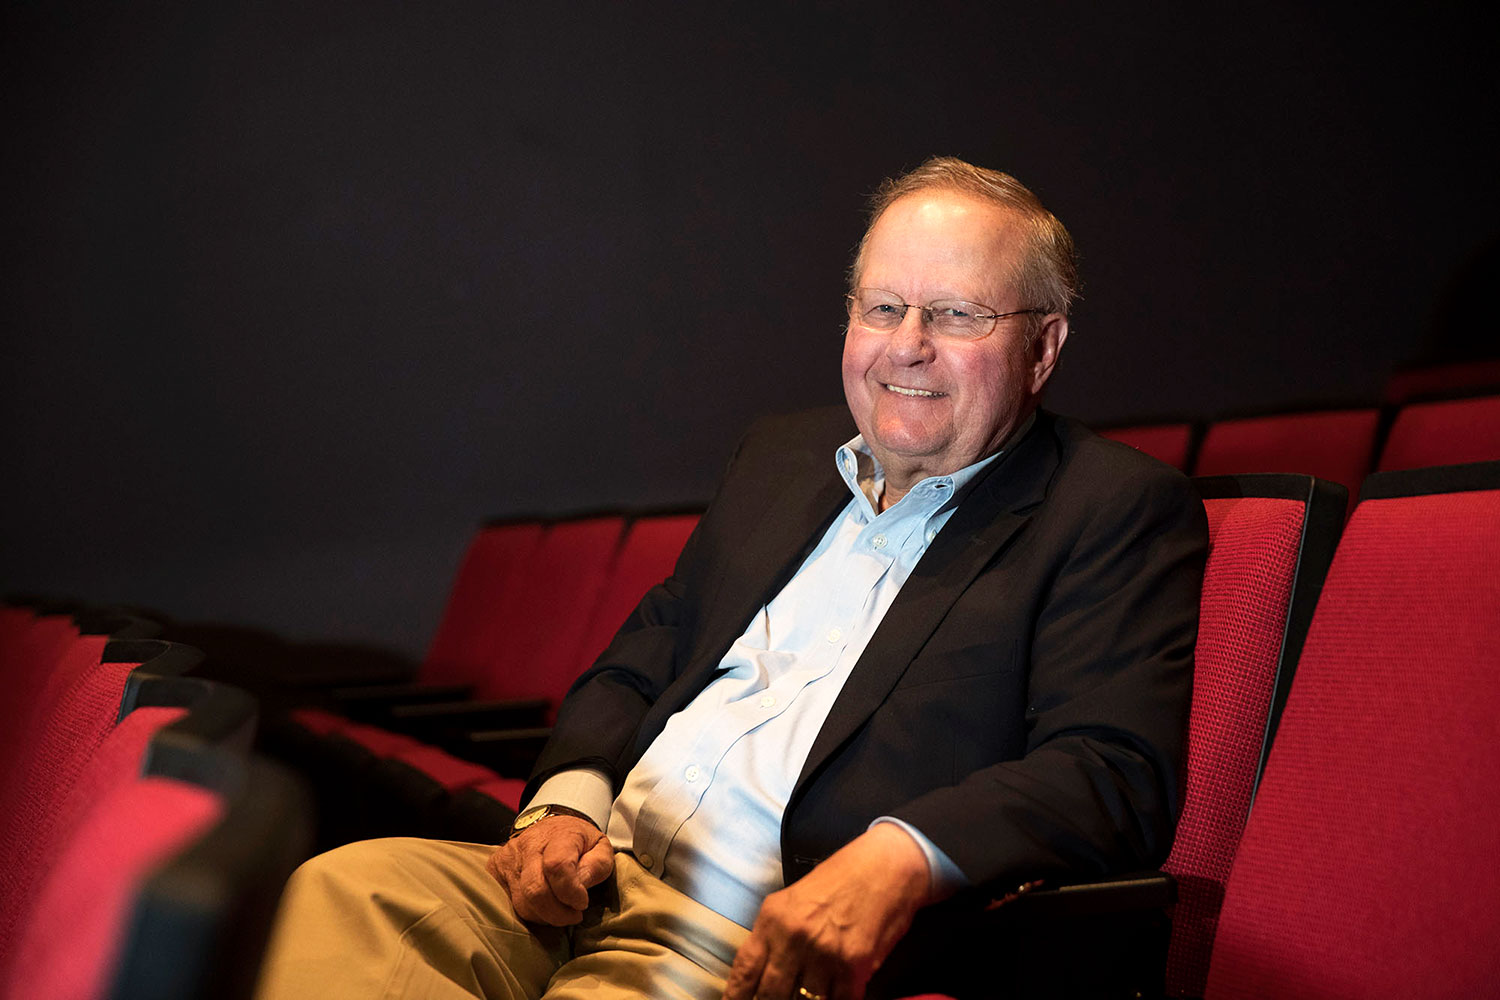 Robert Chapel sitting in a red theatre chair smiling at the camera